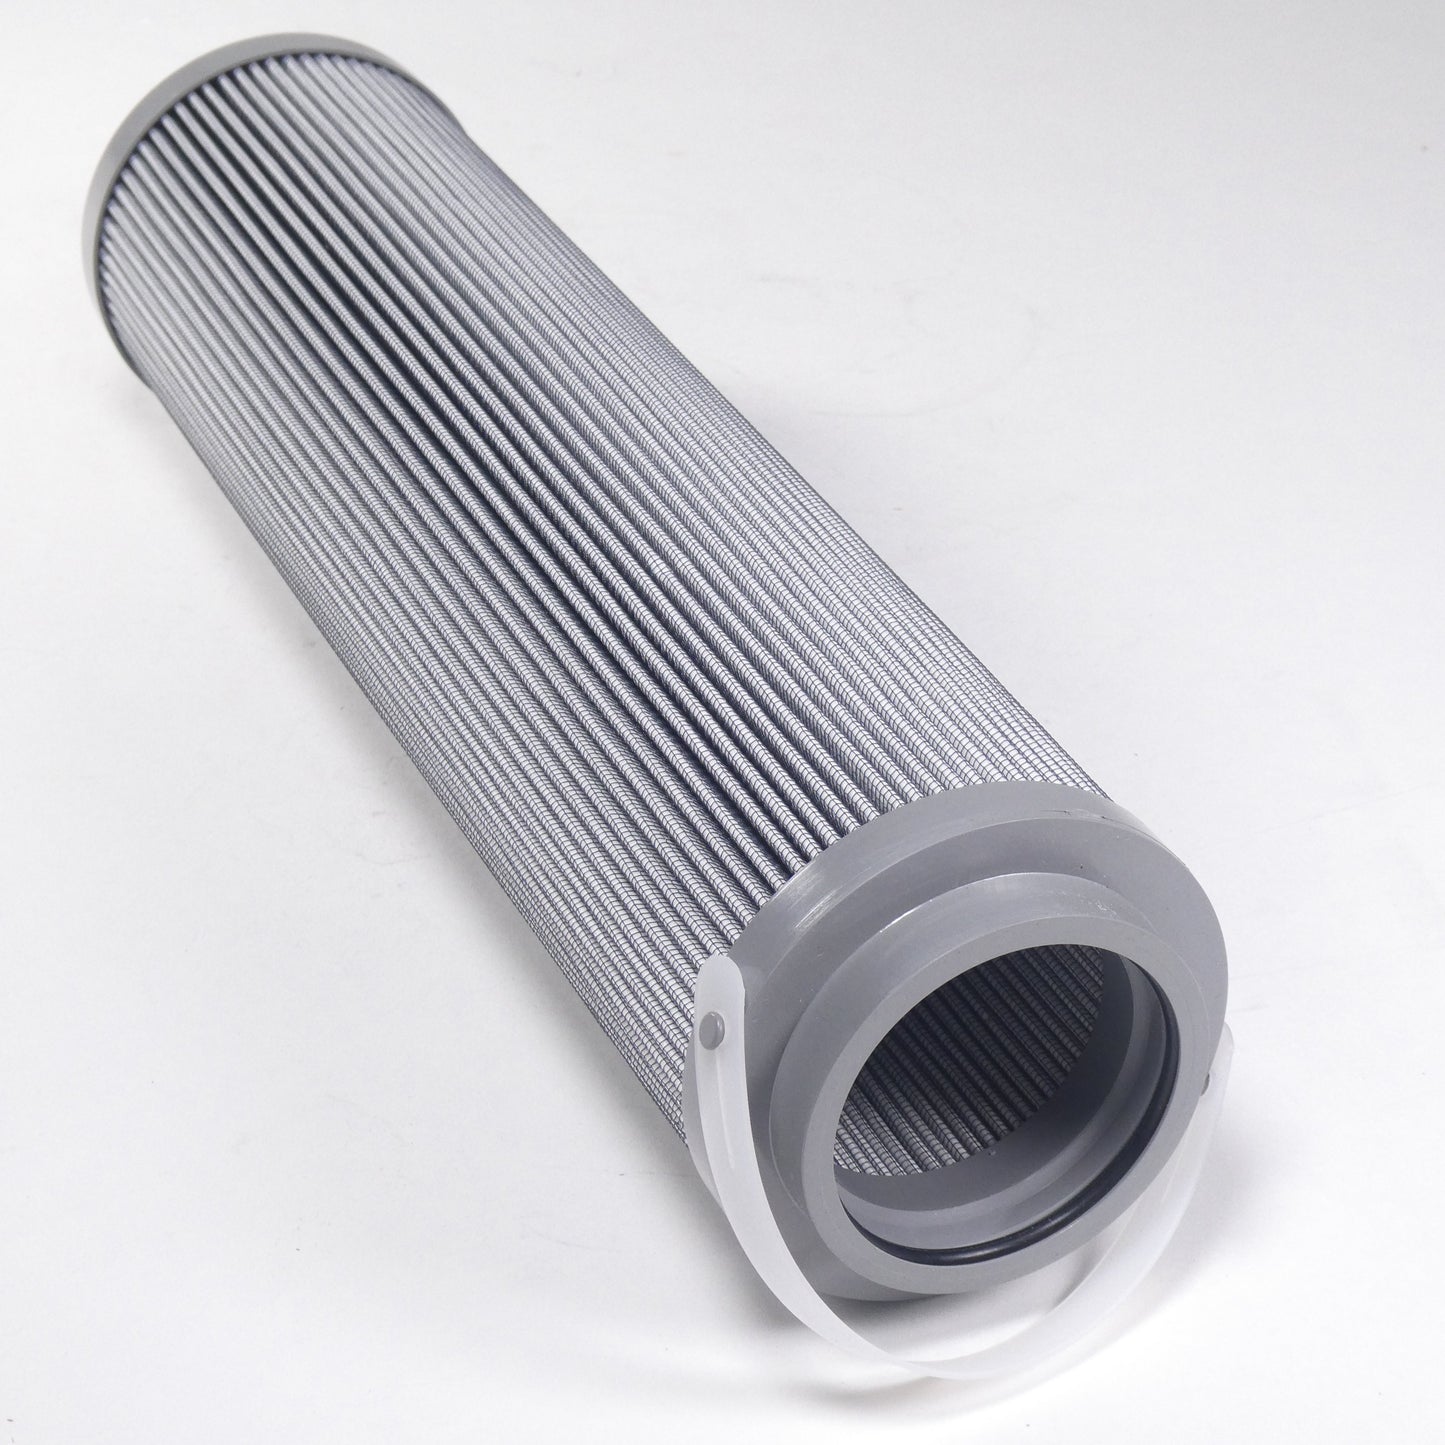 Hydrafil Replacement Filter Element for Kaydon KMP9404A03B16